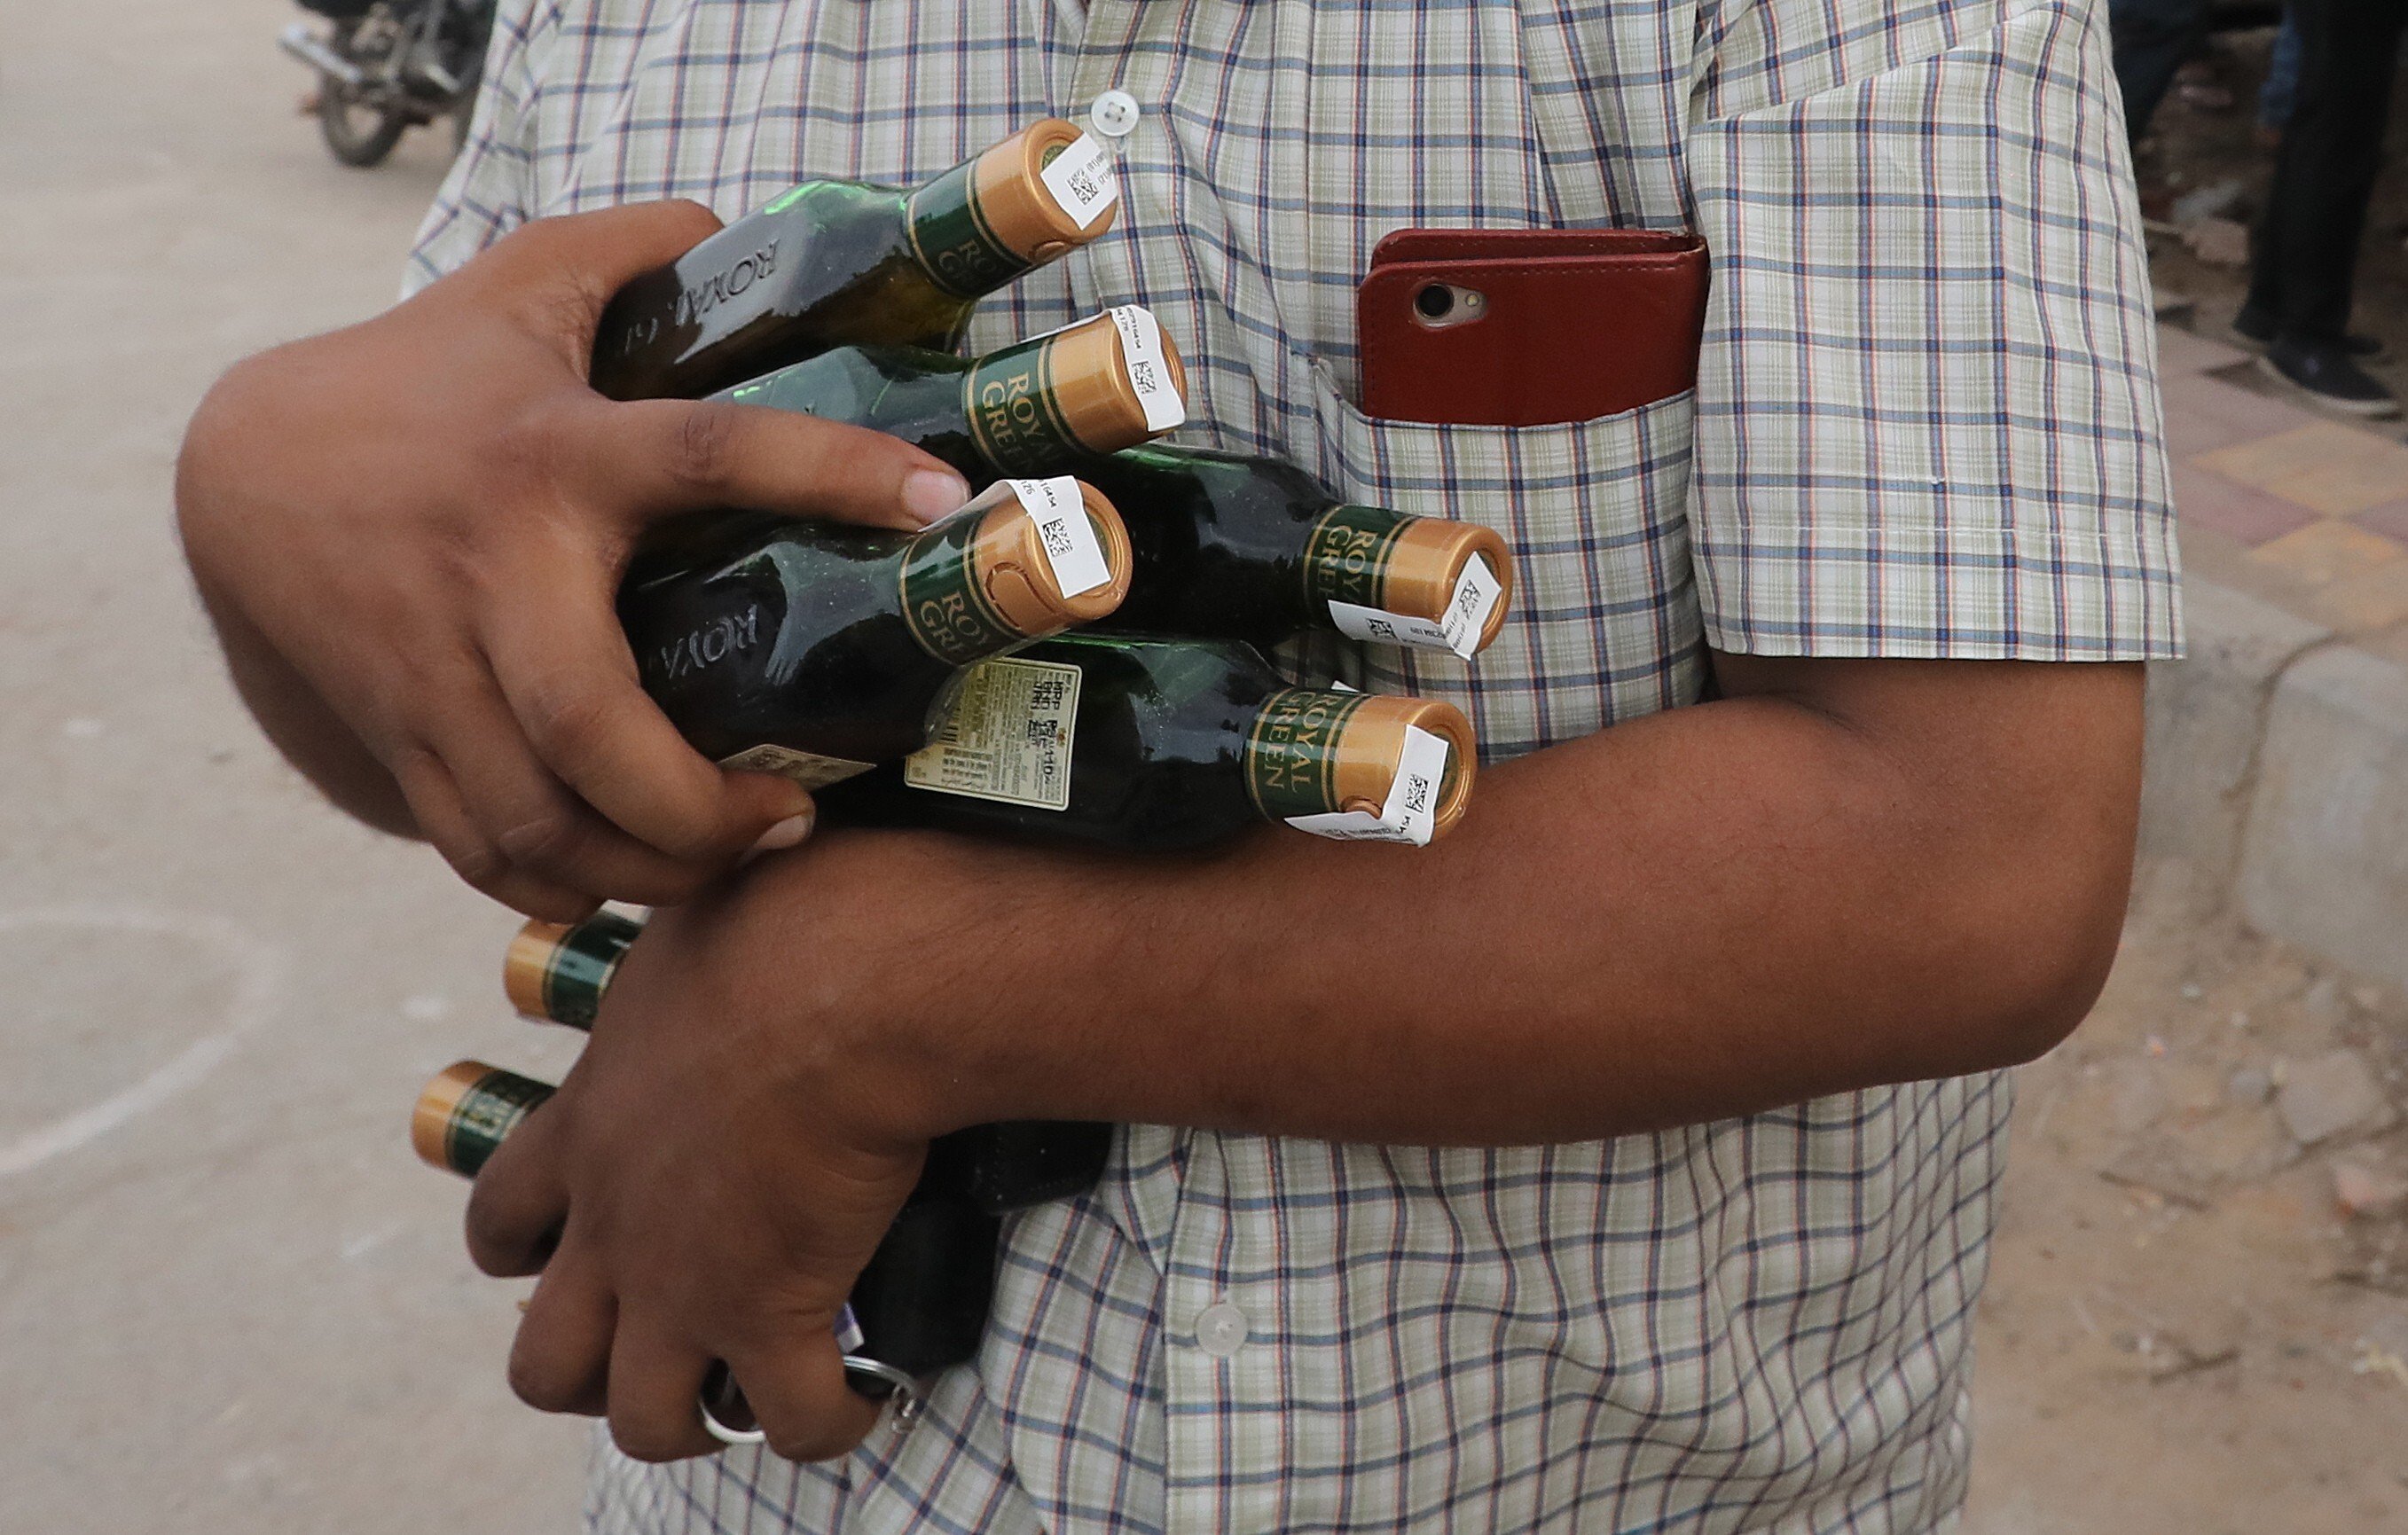 A man buys numerous bottles of liquor after India relaxed restrictions on the sale of alcohol earlier in May, amid concerns about the financial impact of lost revenue. But increased alcohol consumption has led to a rise in domestic abuse, women’s groups say. Photo: EPA-EFE